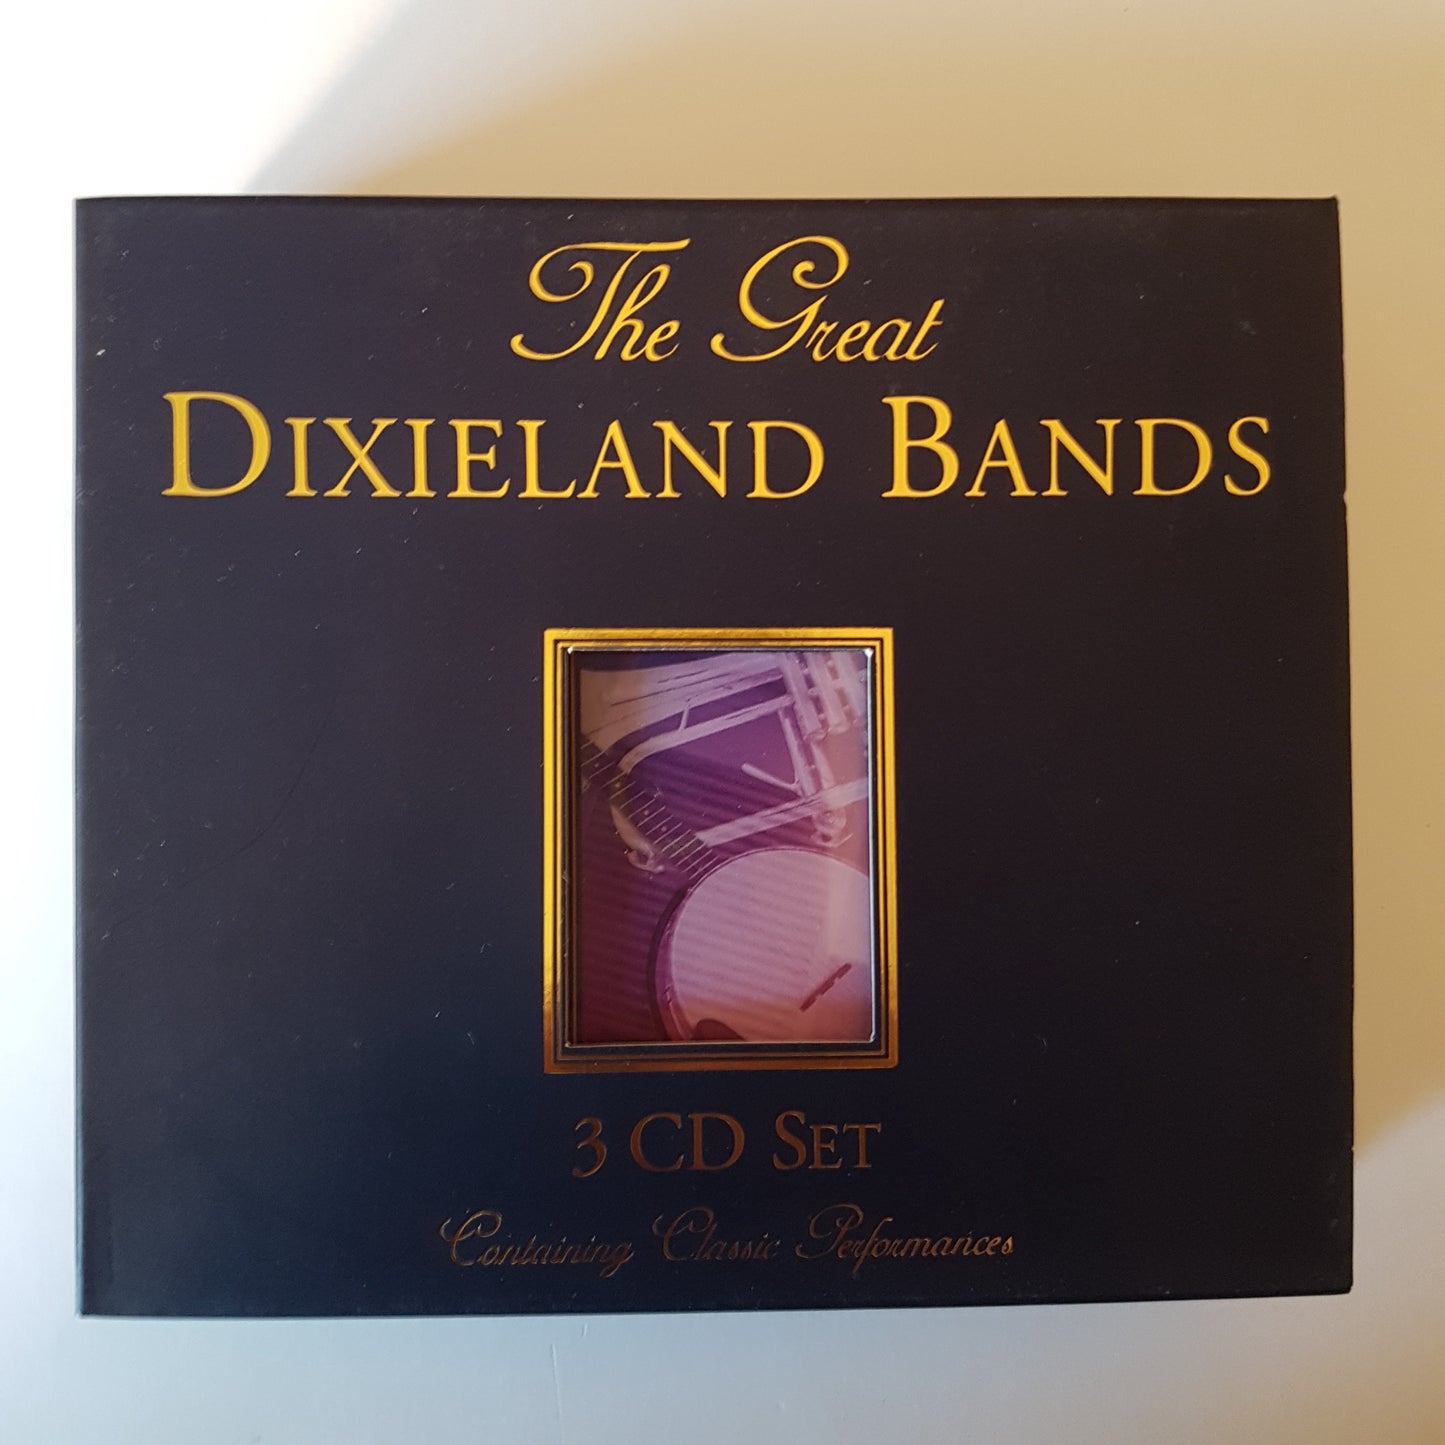 Dixieland Bands, The Great Dixieland Bands (3CD'S)